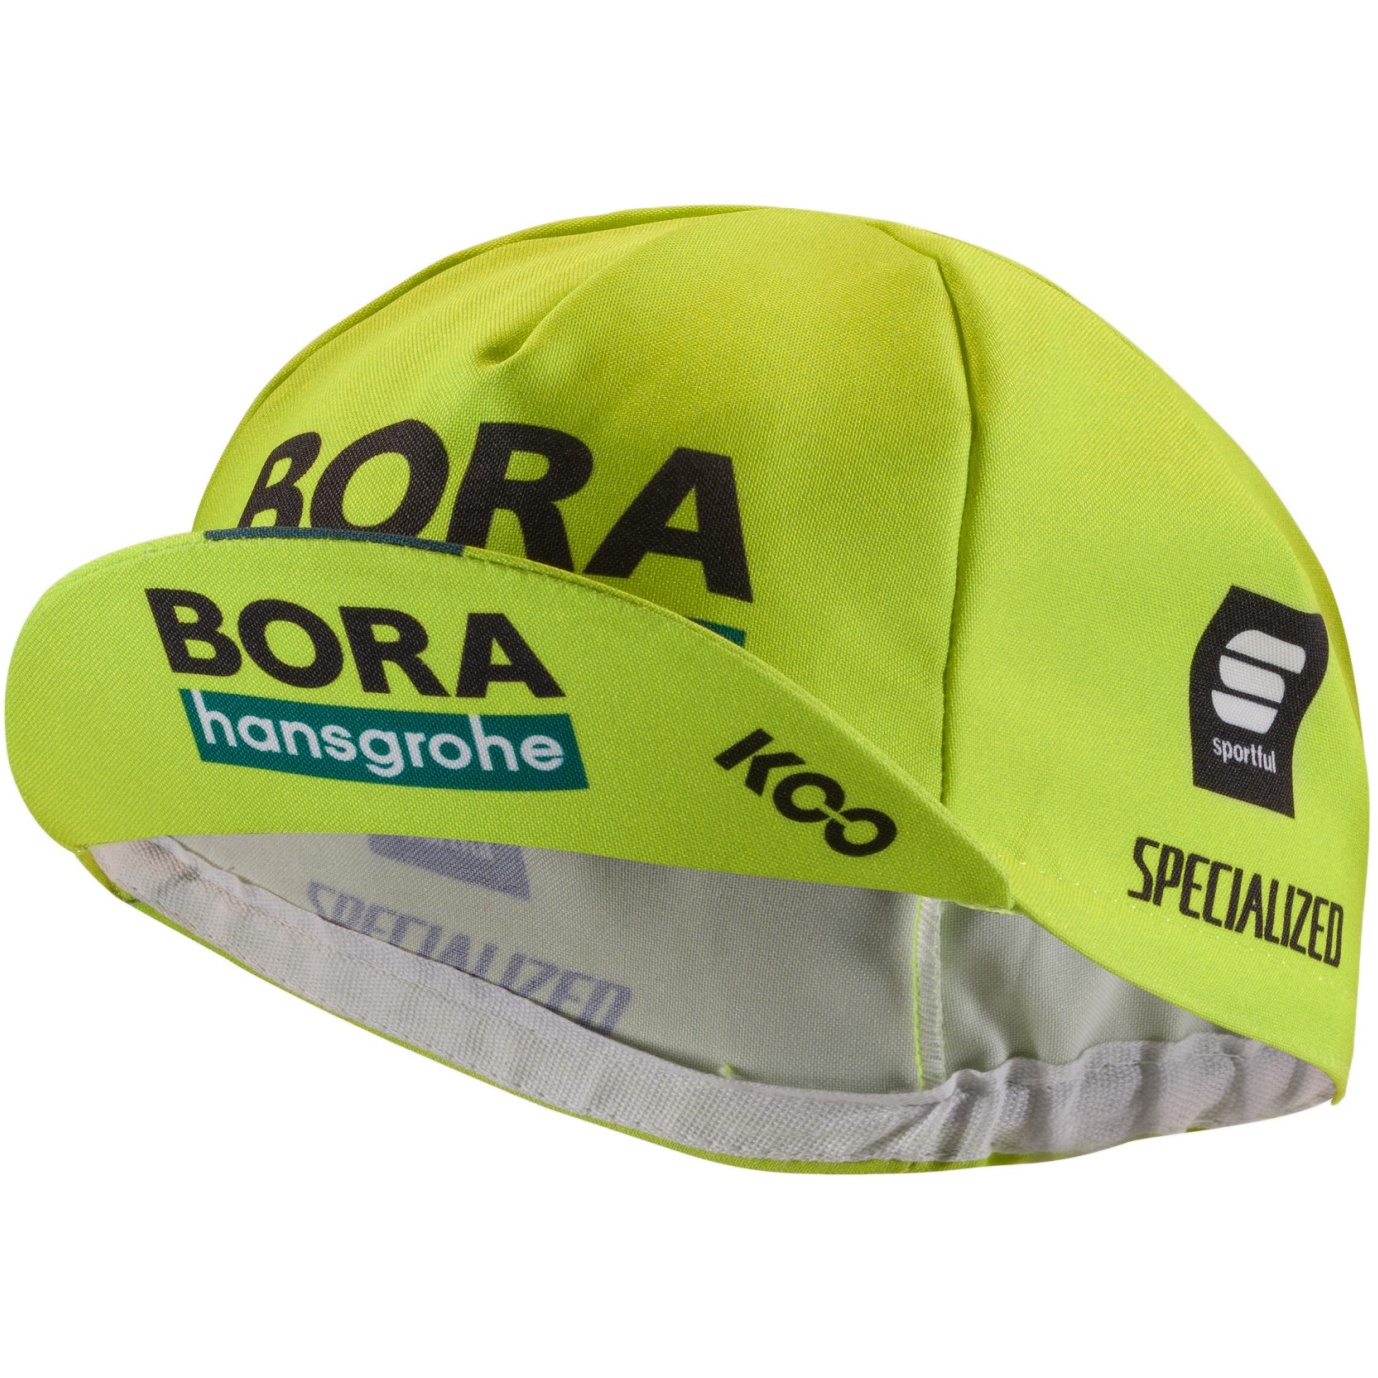 Image of Sportful BORA-hansgrohe Cycling Cap - 384 Lime